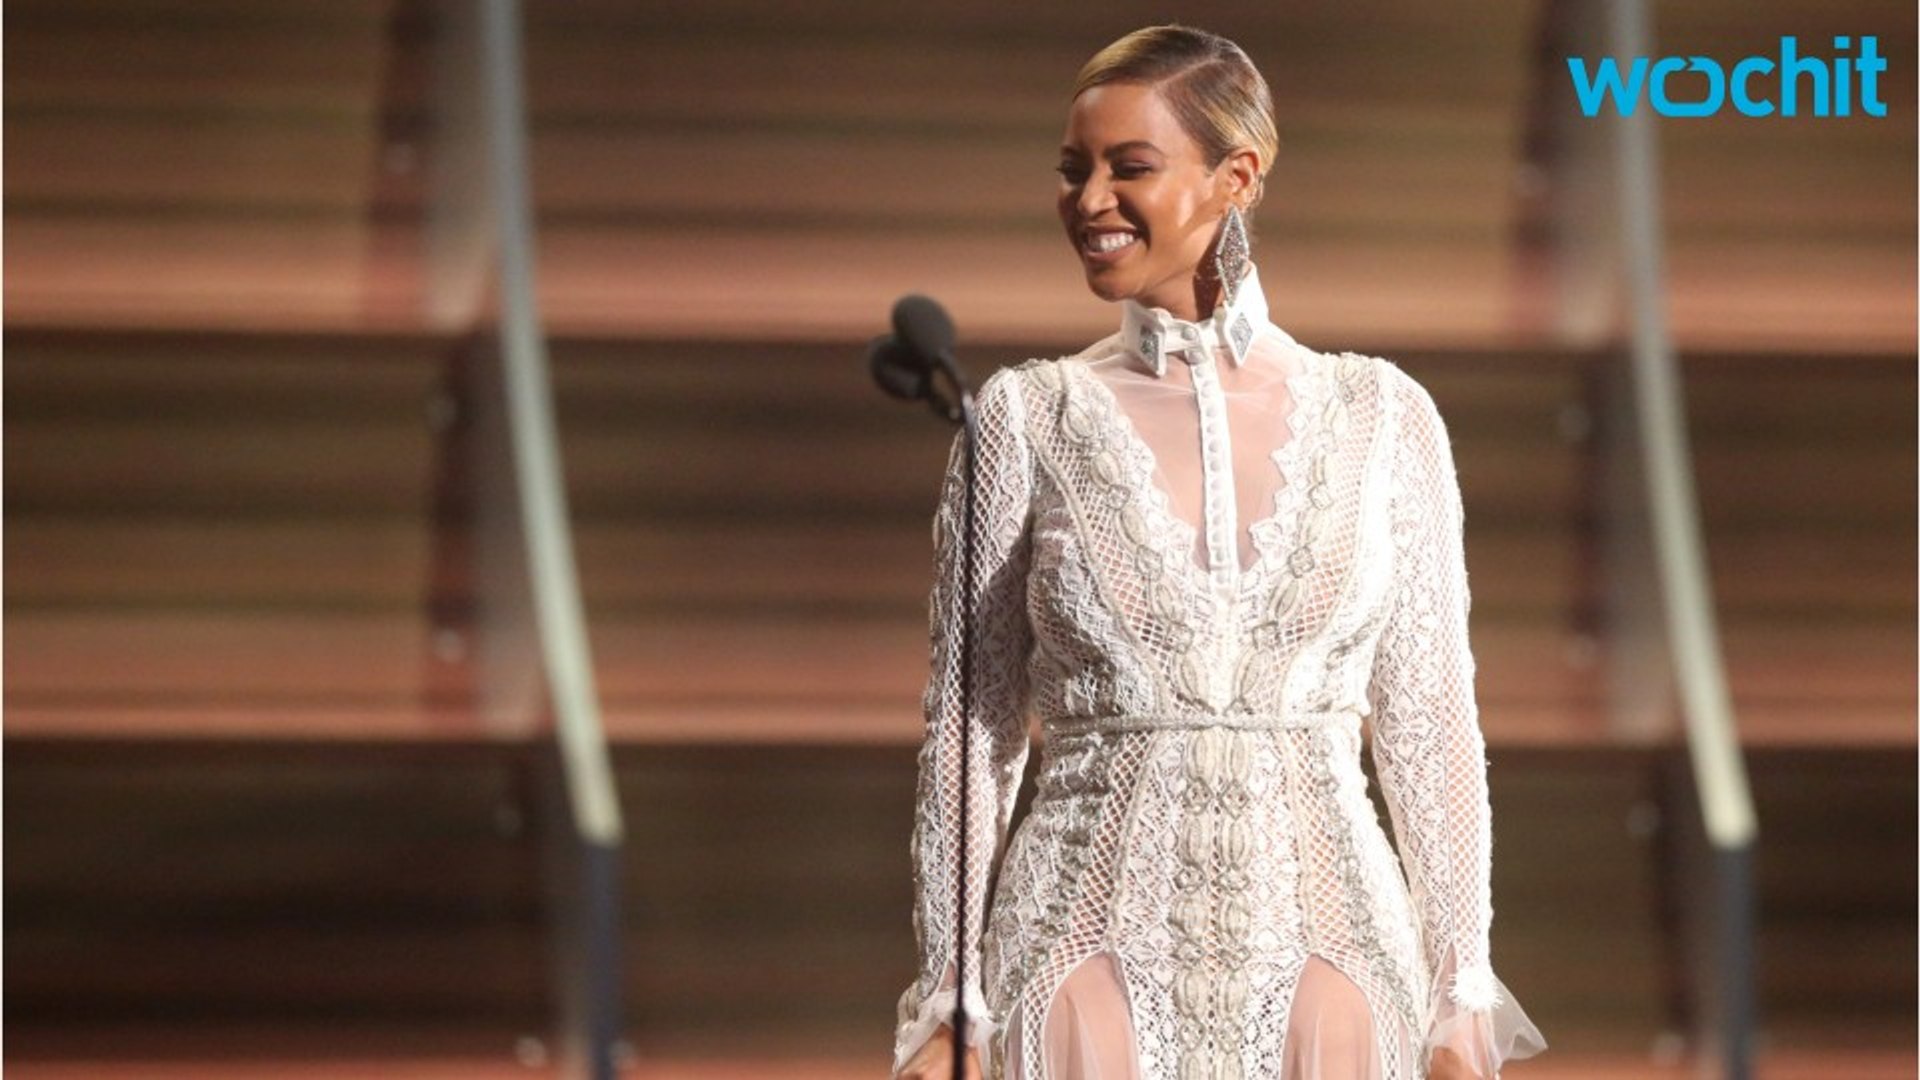 Top Grammy Nods For Beyonce, Adele